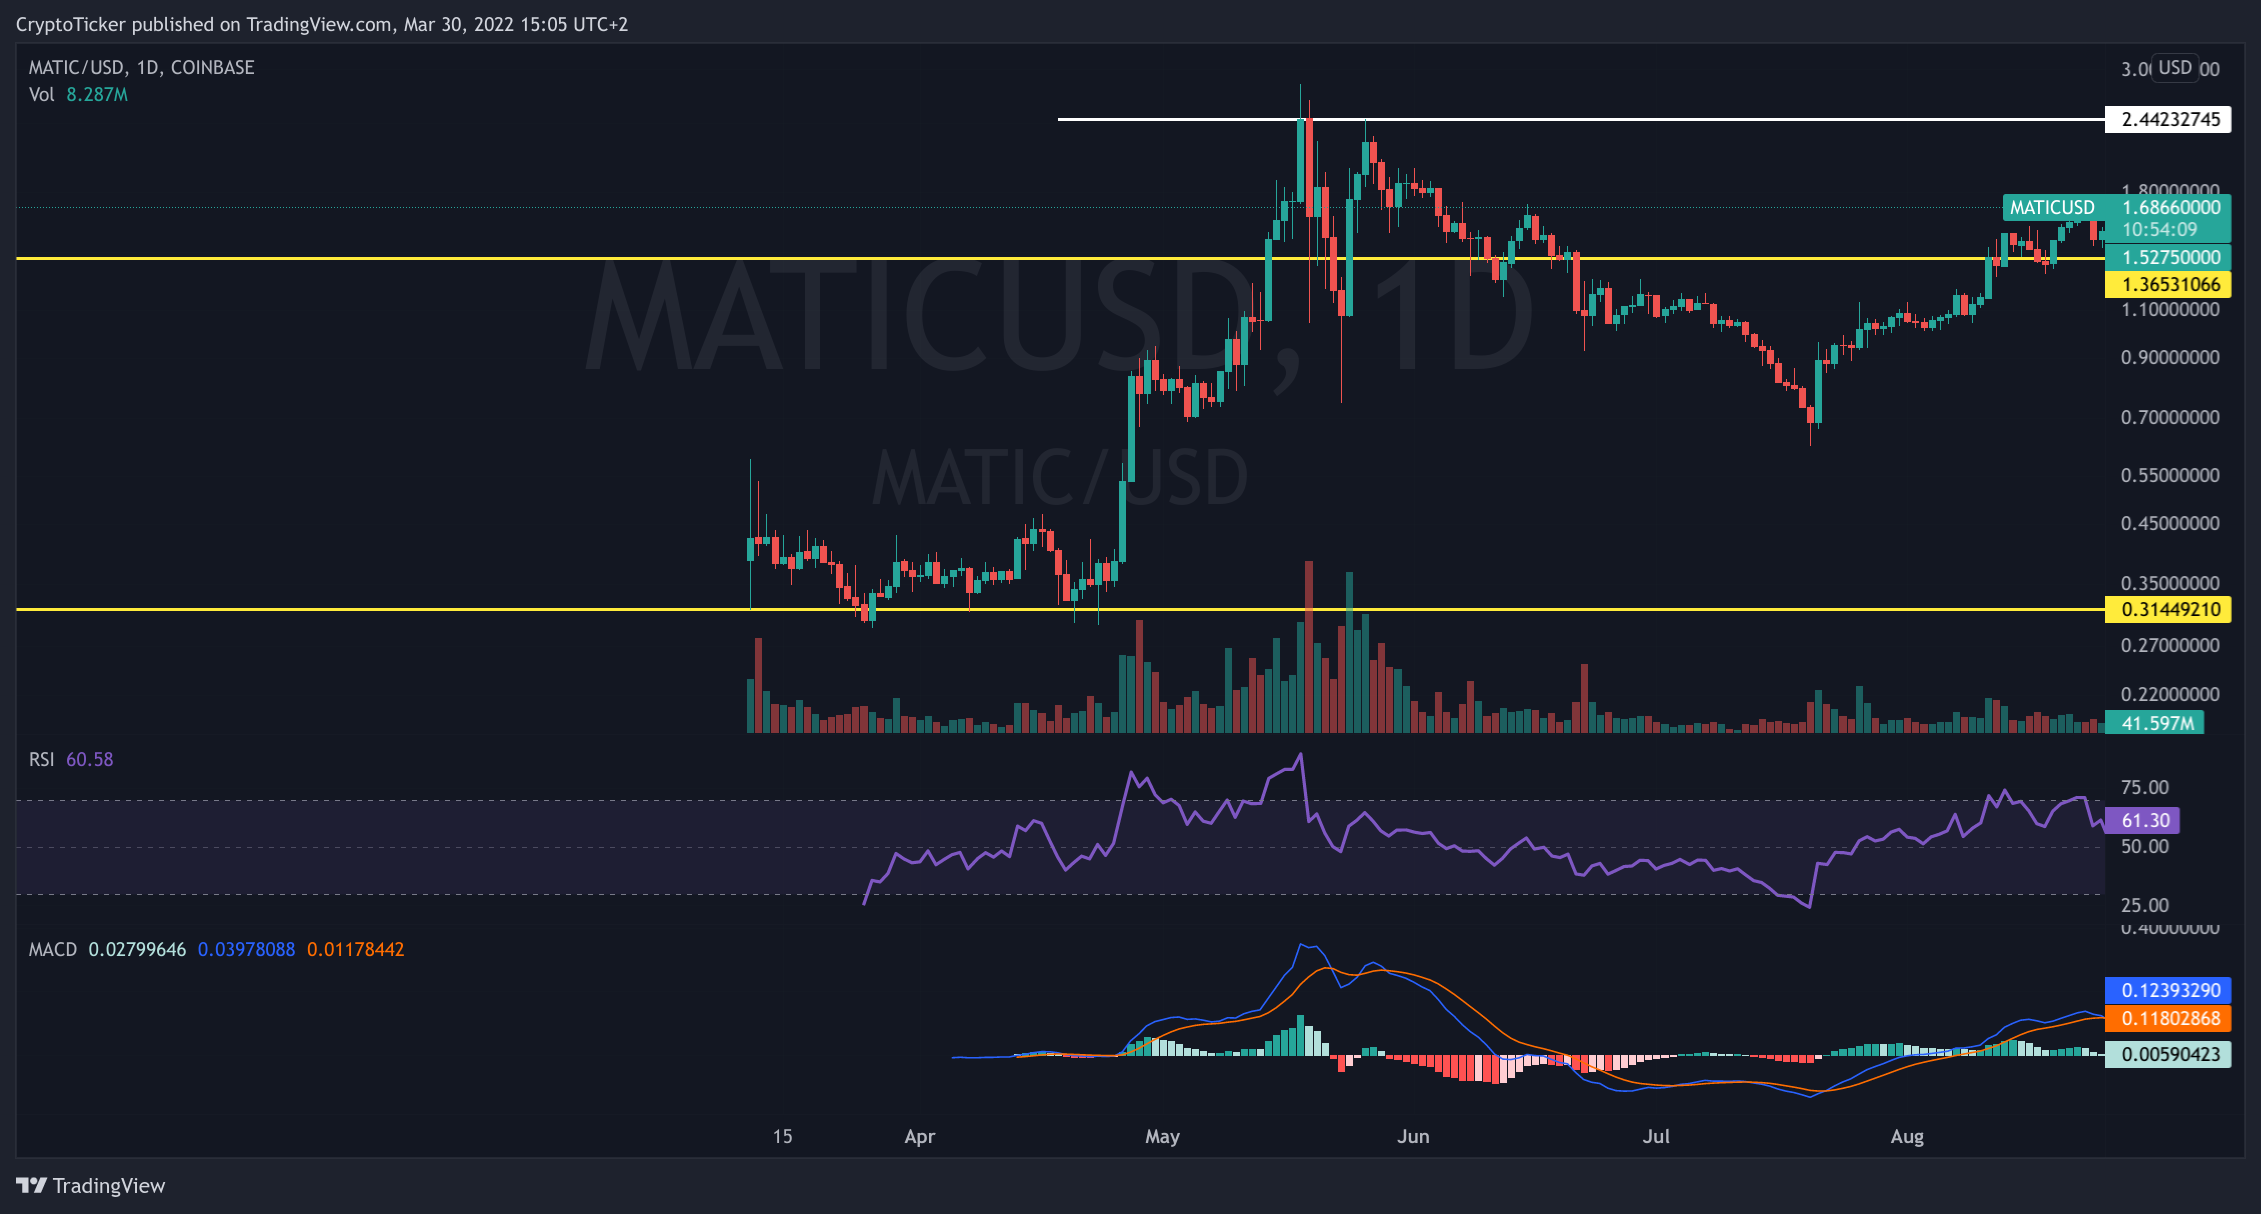 MATIC/USD 1-day chart showing MATIC soaring in valuation